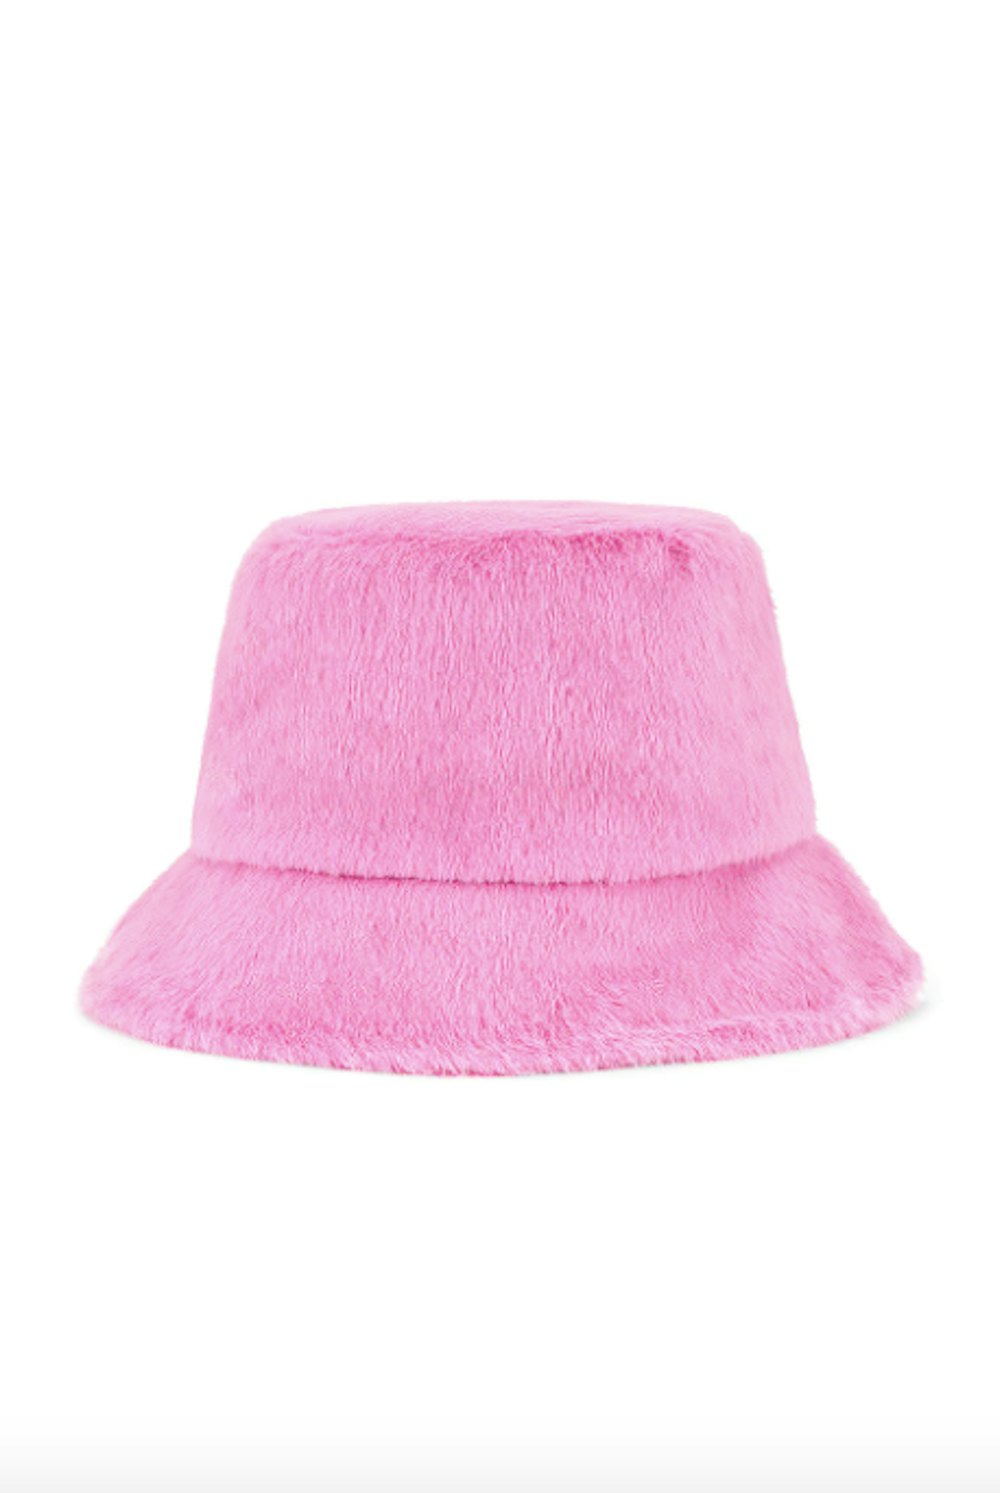 Shop Fuzzy Bucket Hats To Keep You Cozy & Warm This Winter 2022